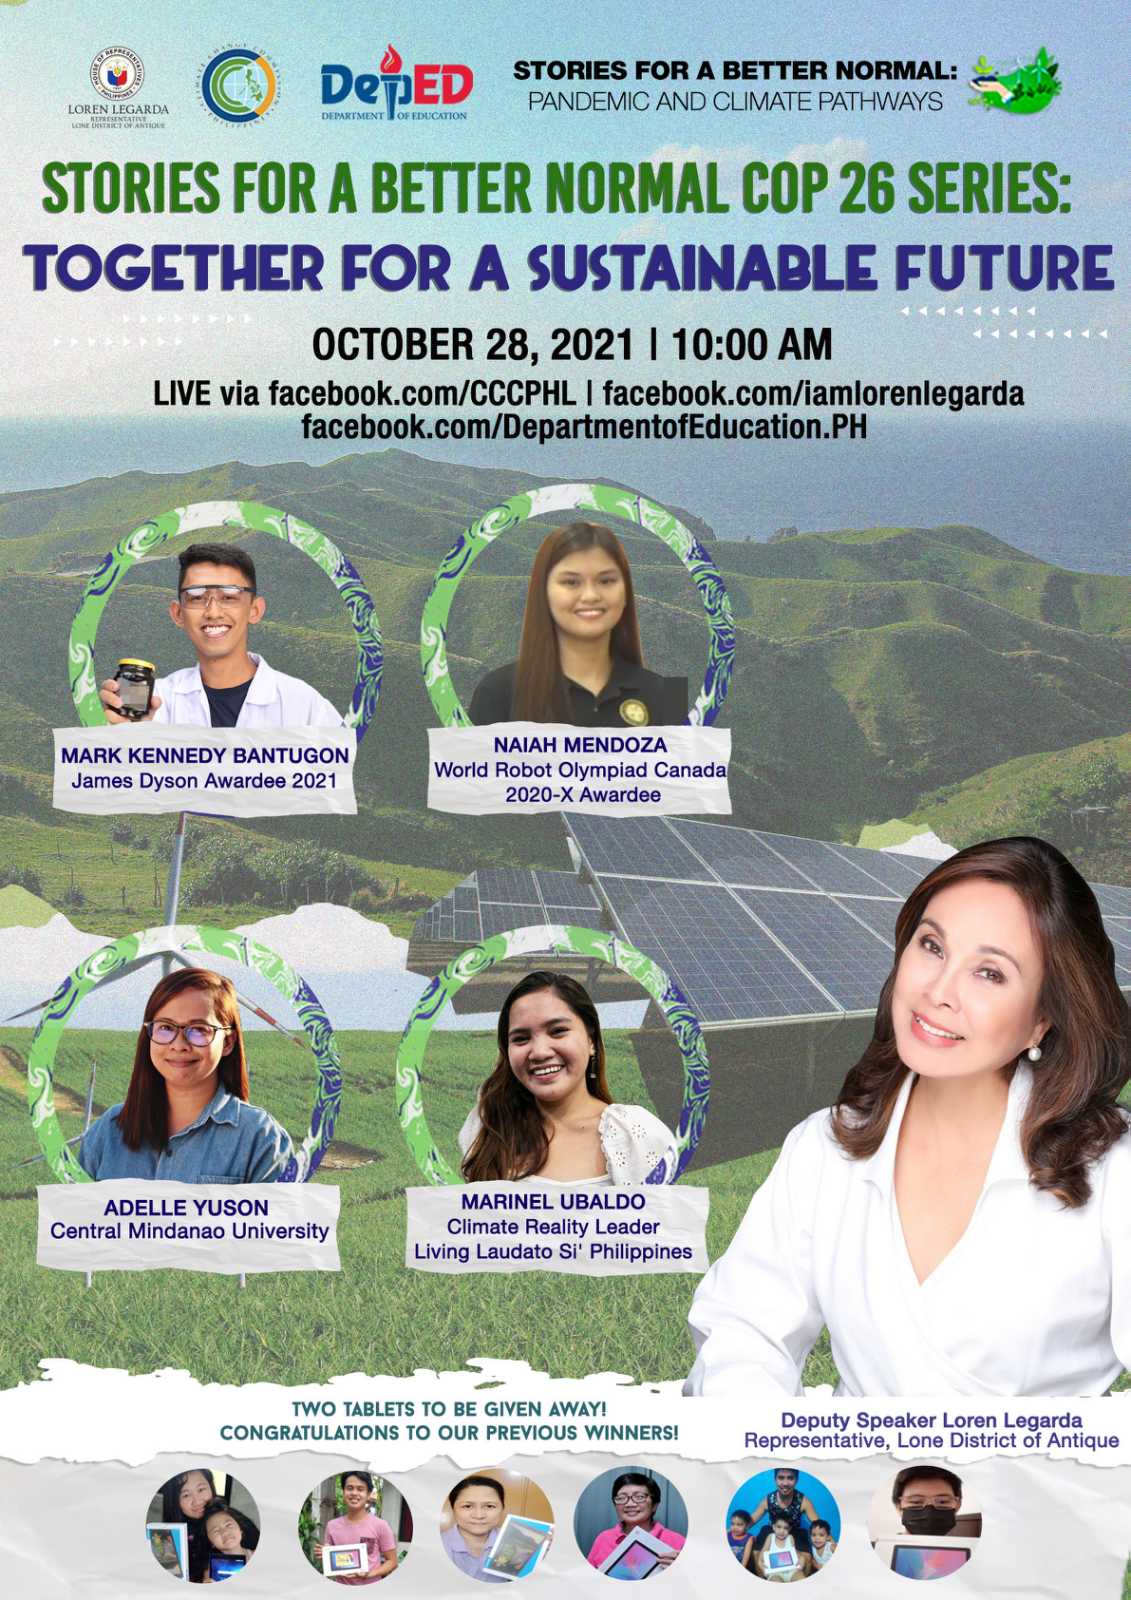 Together for a Sustainable Future.